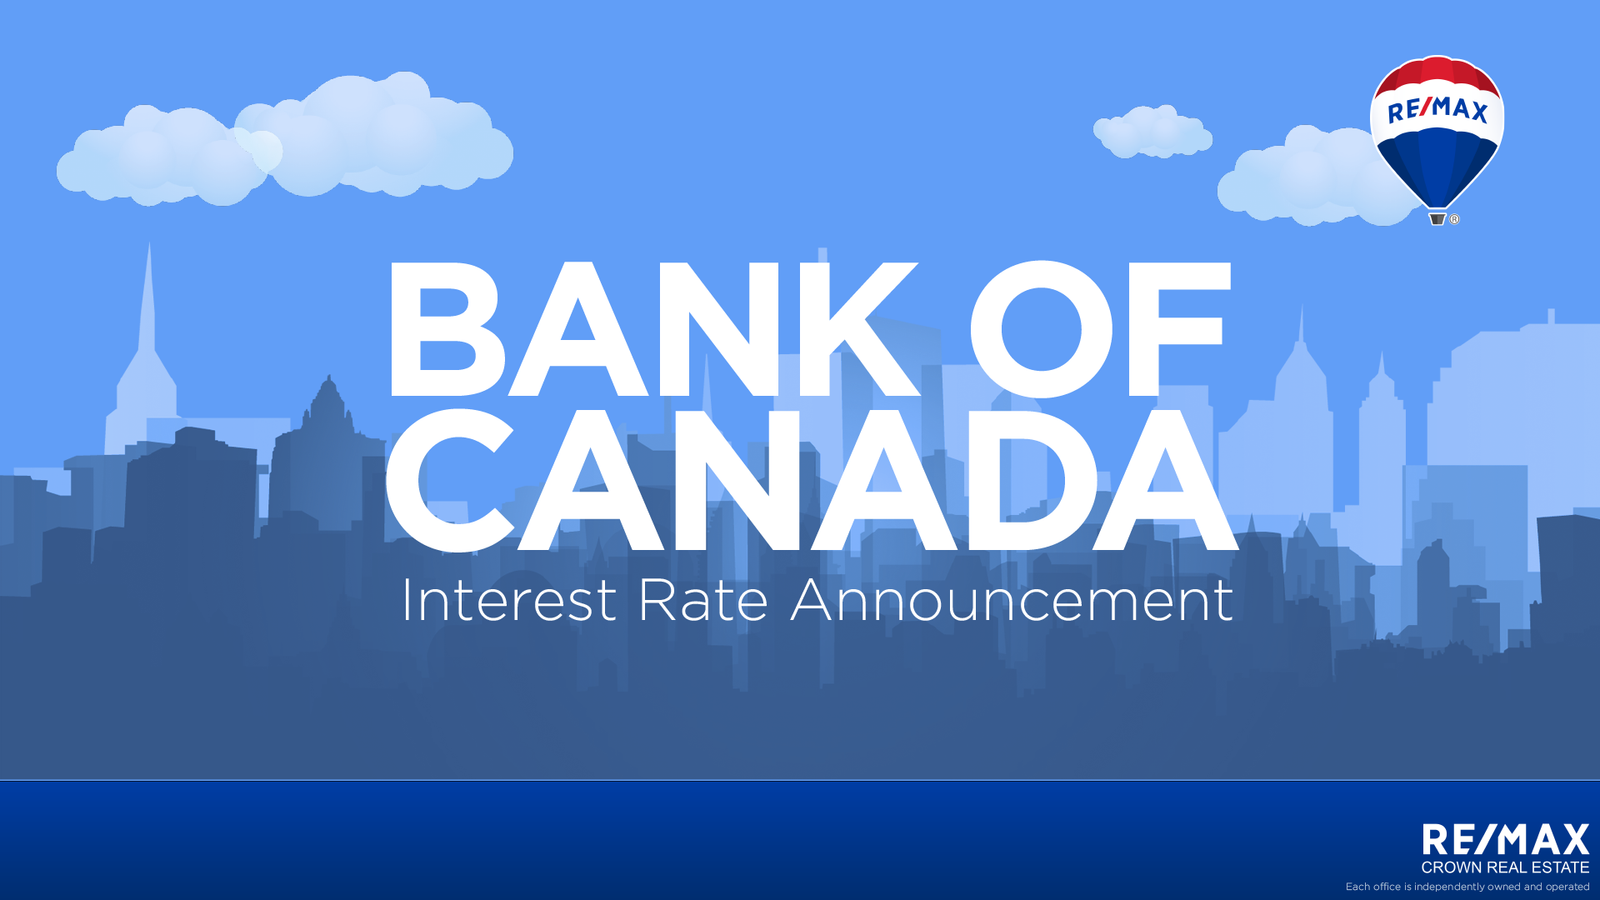 Bank of Canada Makes Interest Rate Announcement